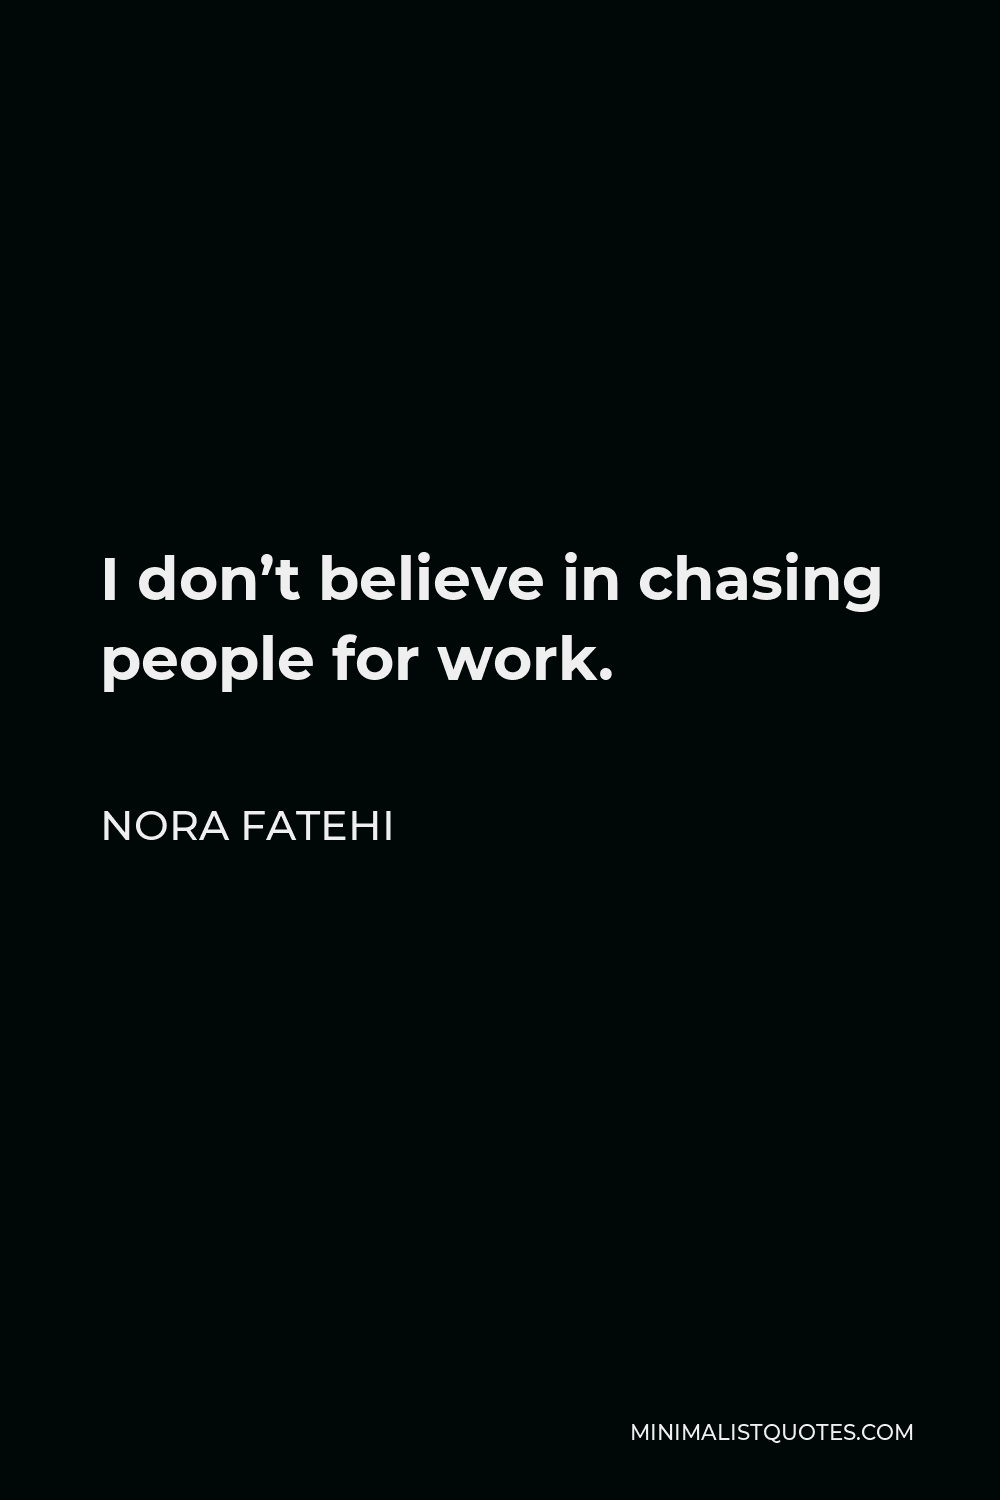 Nora Fatehi Quote - I don’t believe in chasing people for work.